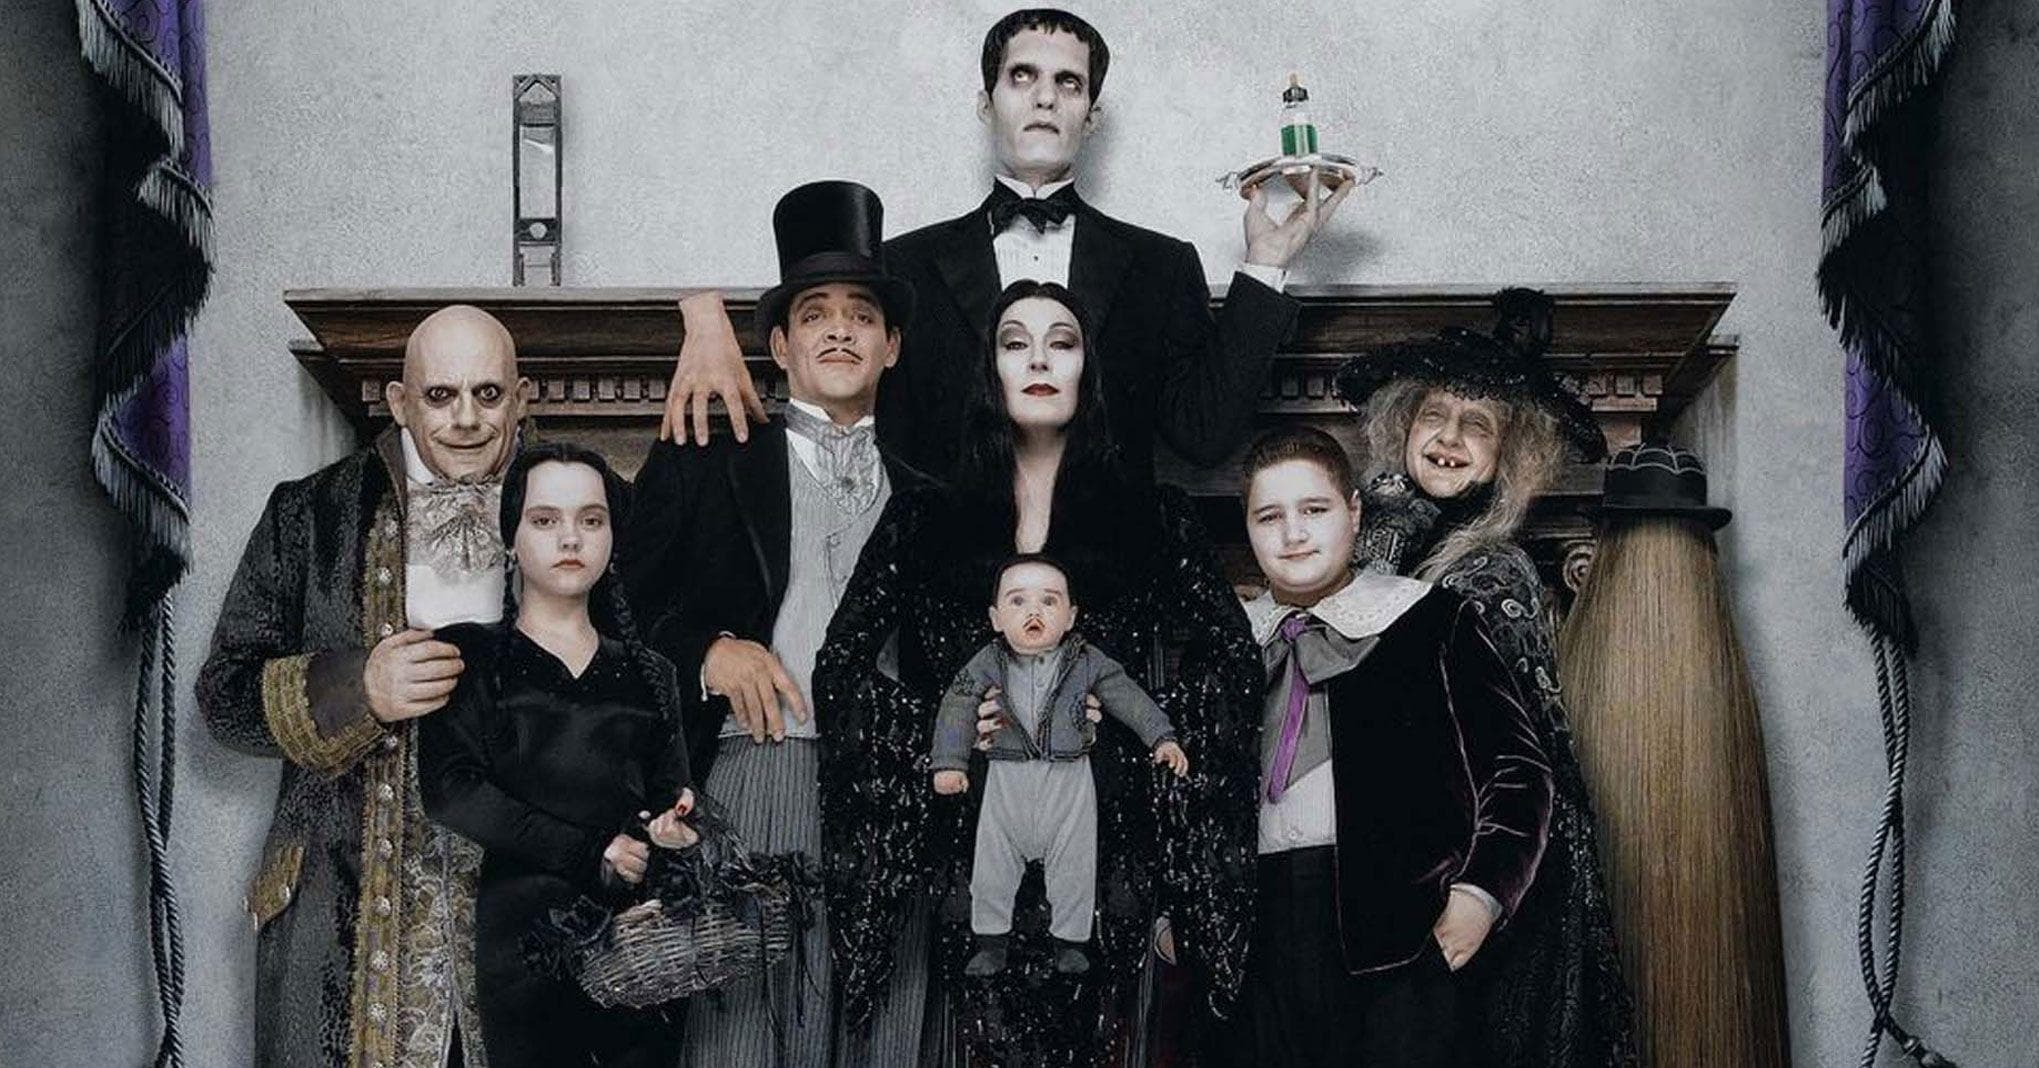 Best of Addams family lemonade stand